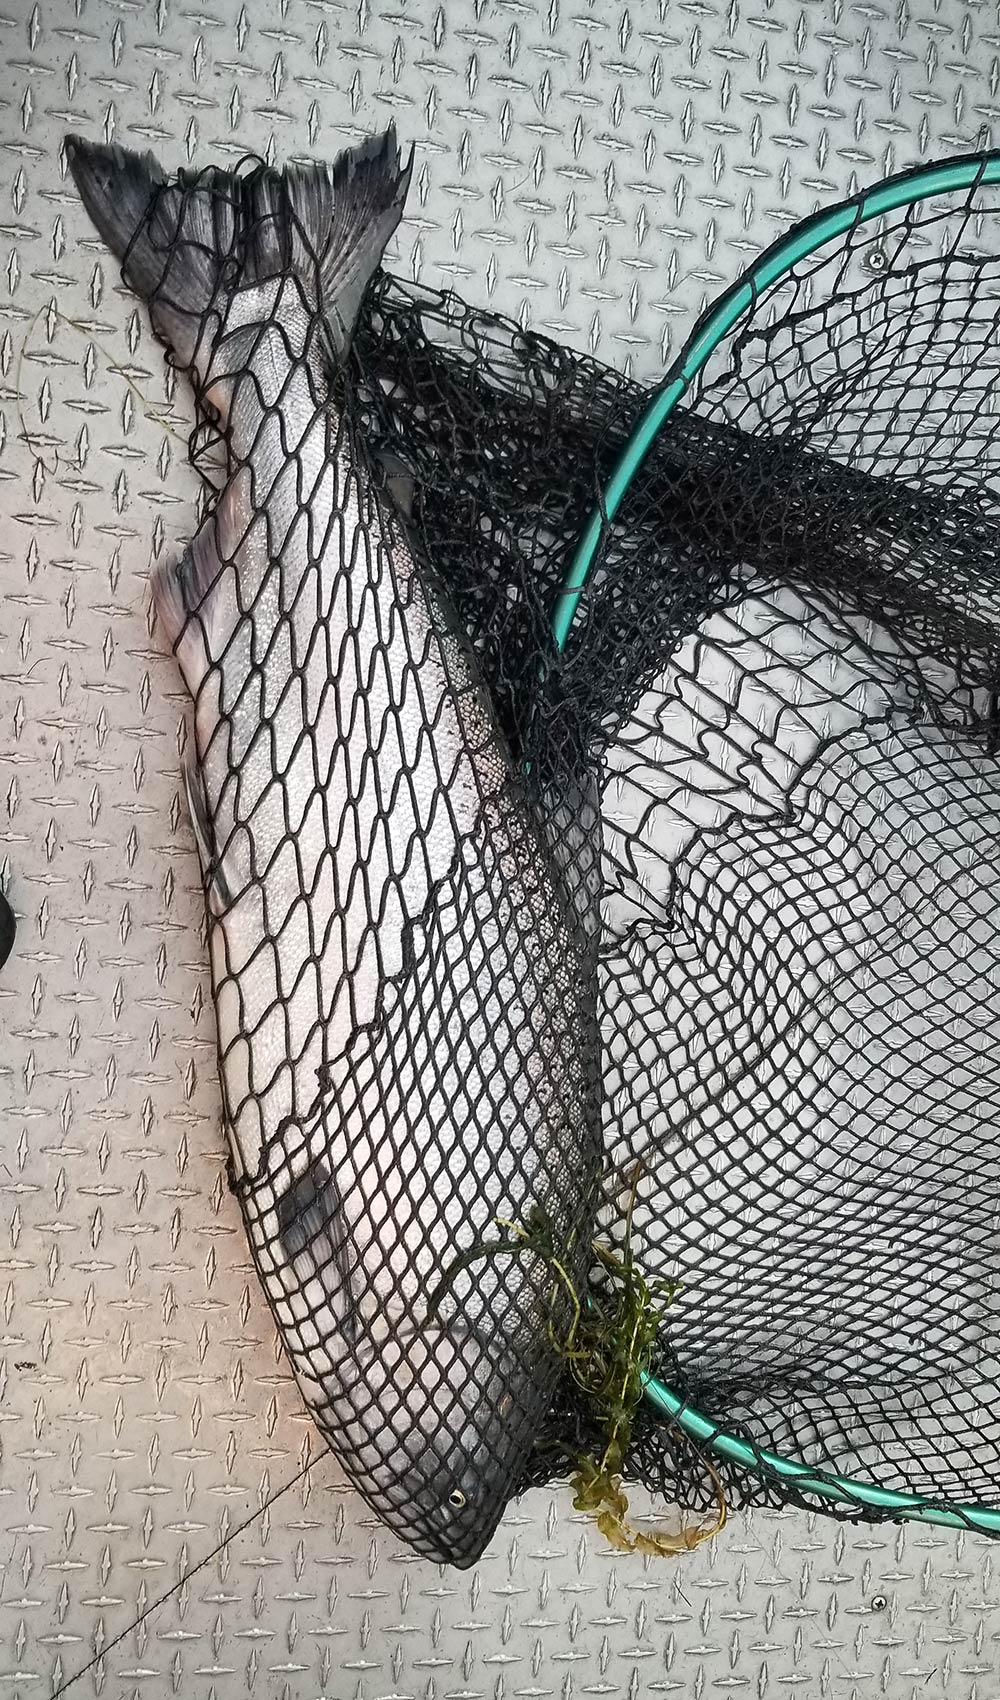 Fall Chinook, Columbia River Buoy 10, Opener Weekend: August 14, 2020